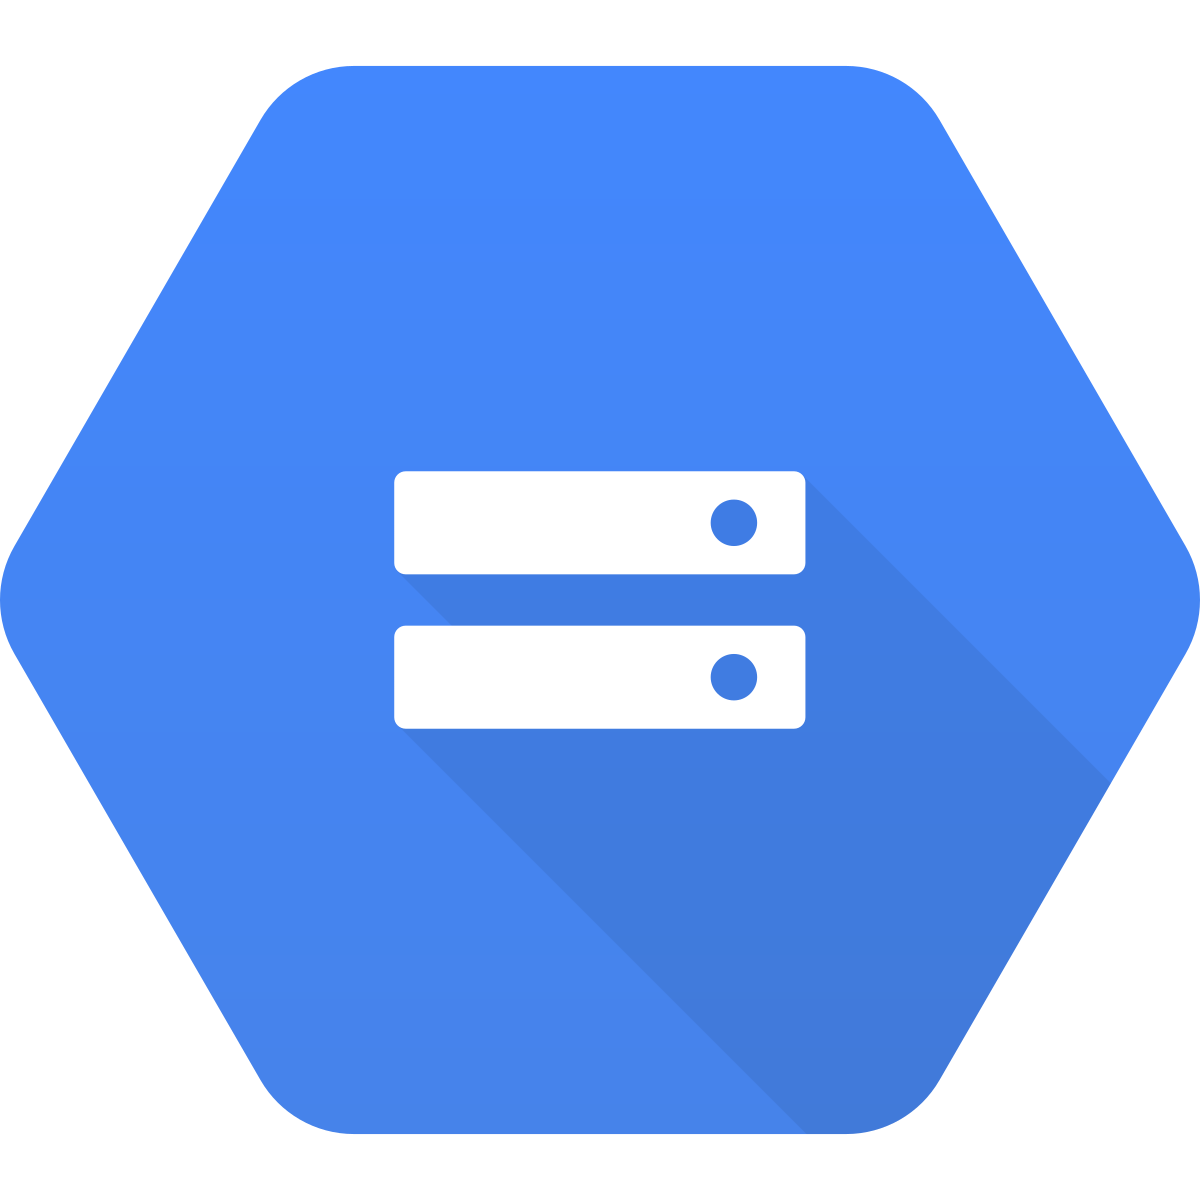 Sync data from Google Cloud Storage to Auth0.